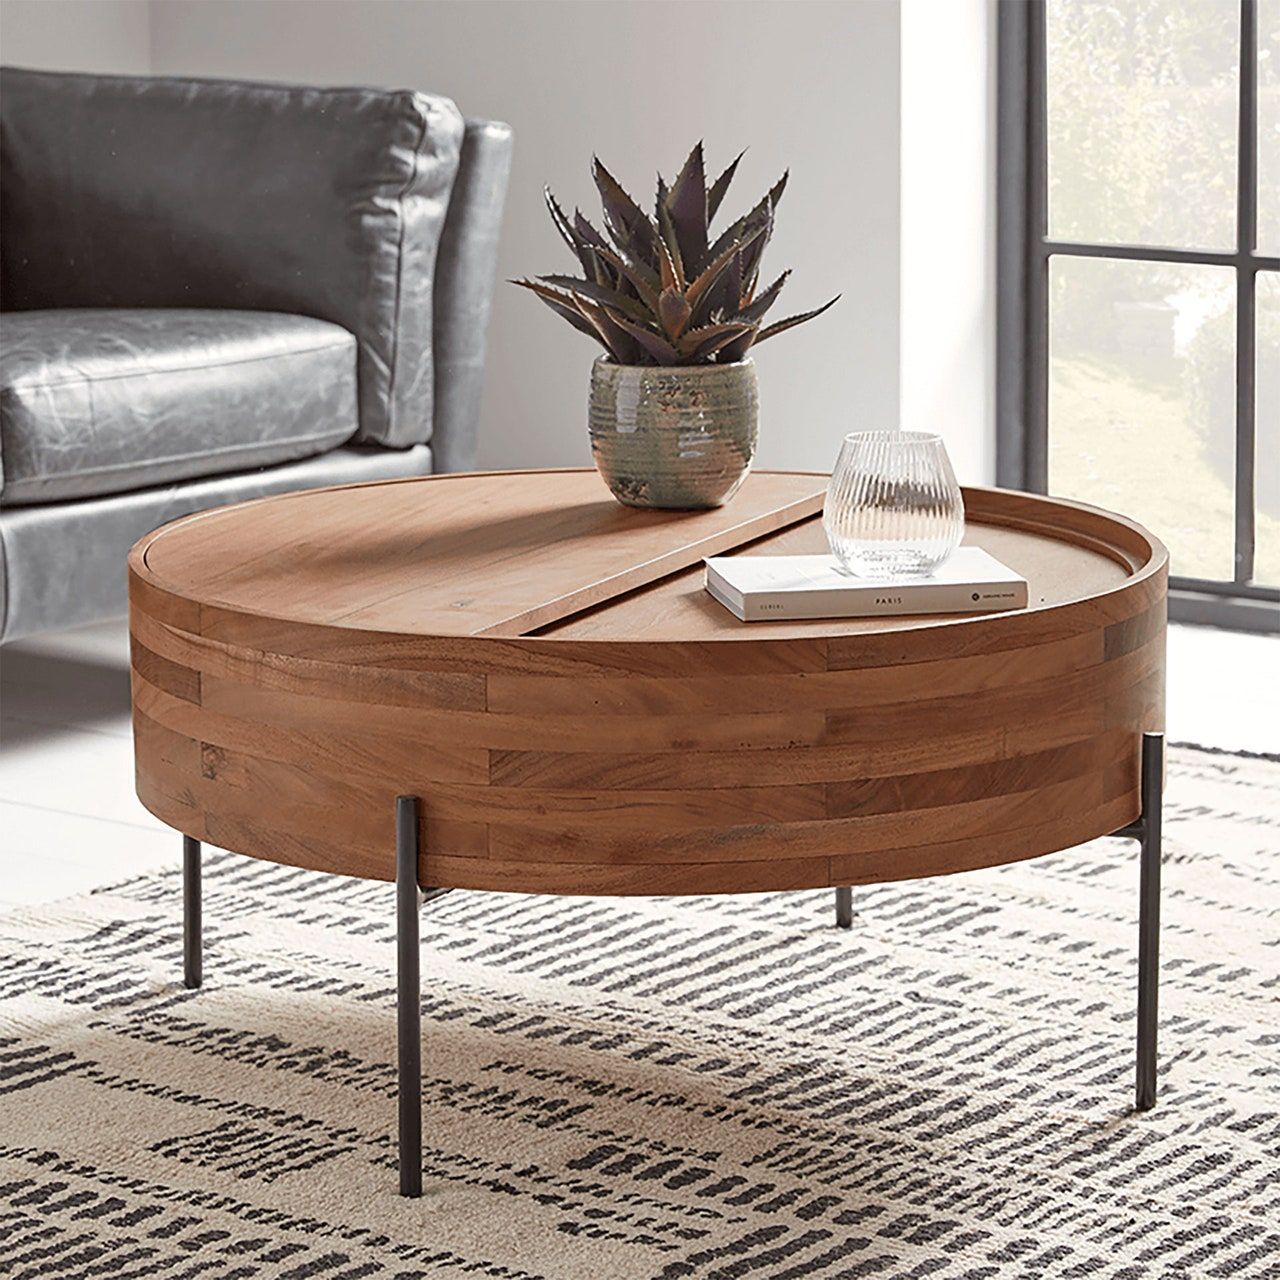 23 Stylish & Functional Coffee Tables: Best Coffee Tables 2022 | Glamour Uk Within Coffee Tables With Storage (View 19 of 20)